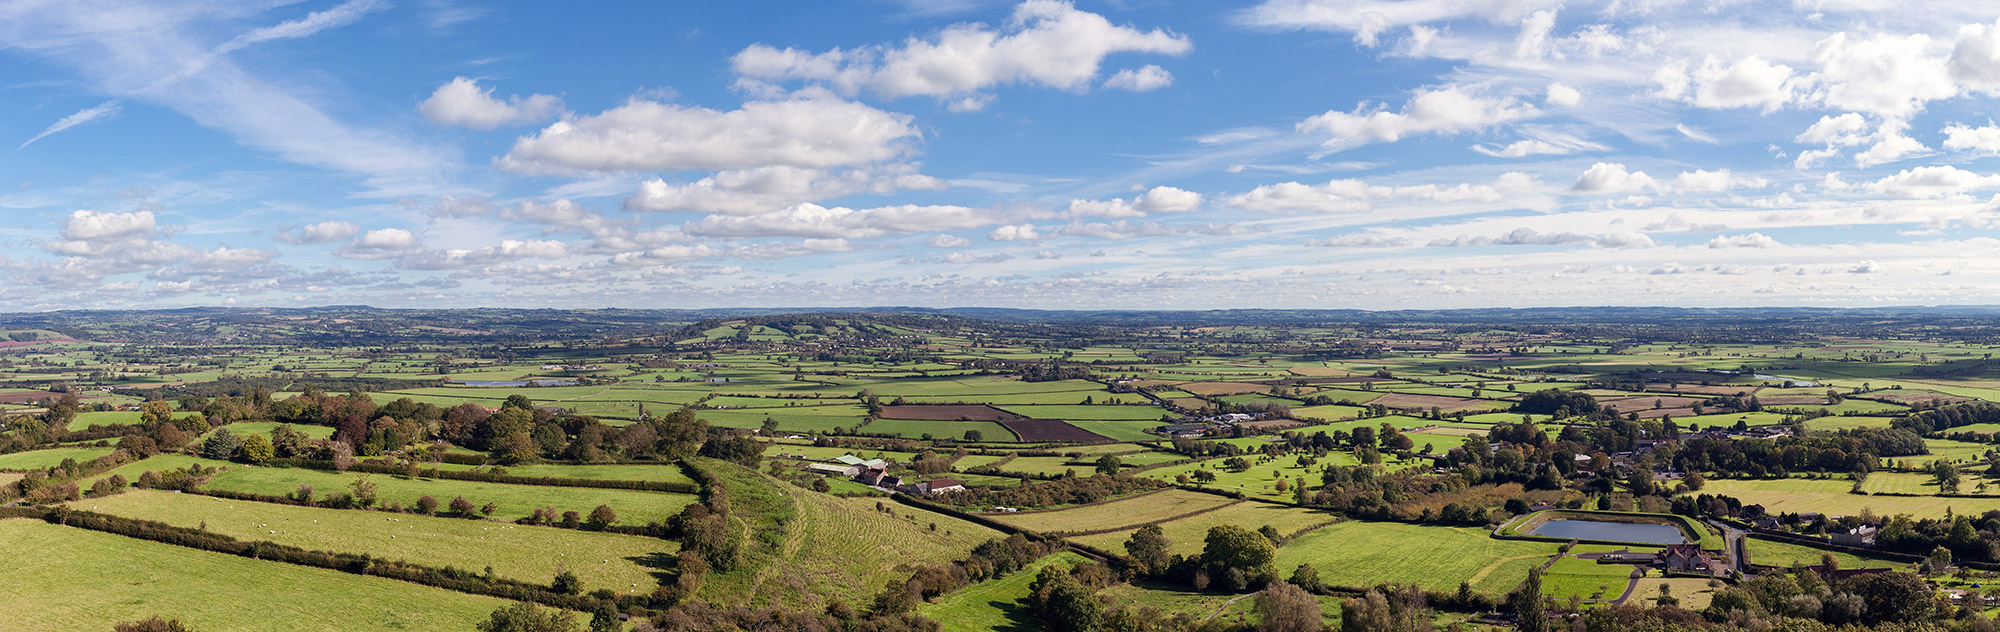 Land in the south-west – we deal with land across Devon and Cornwall